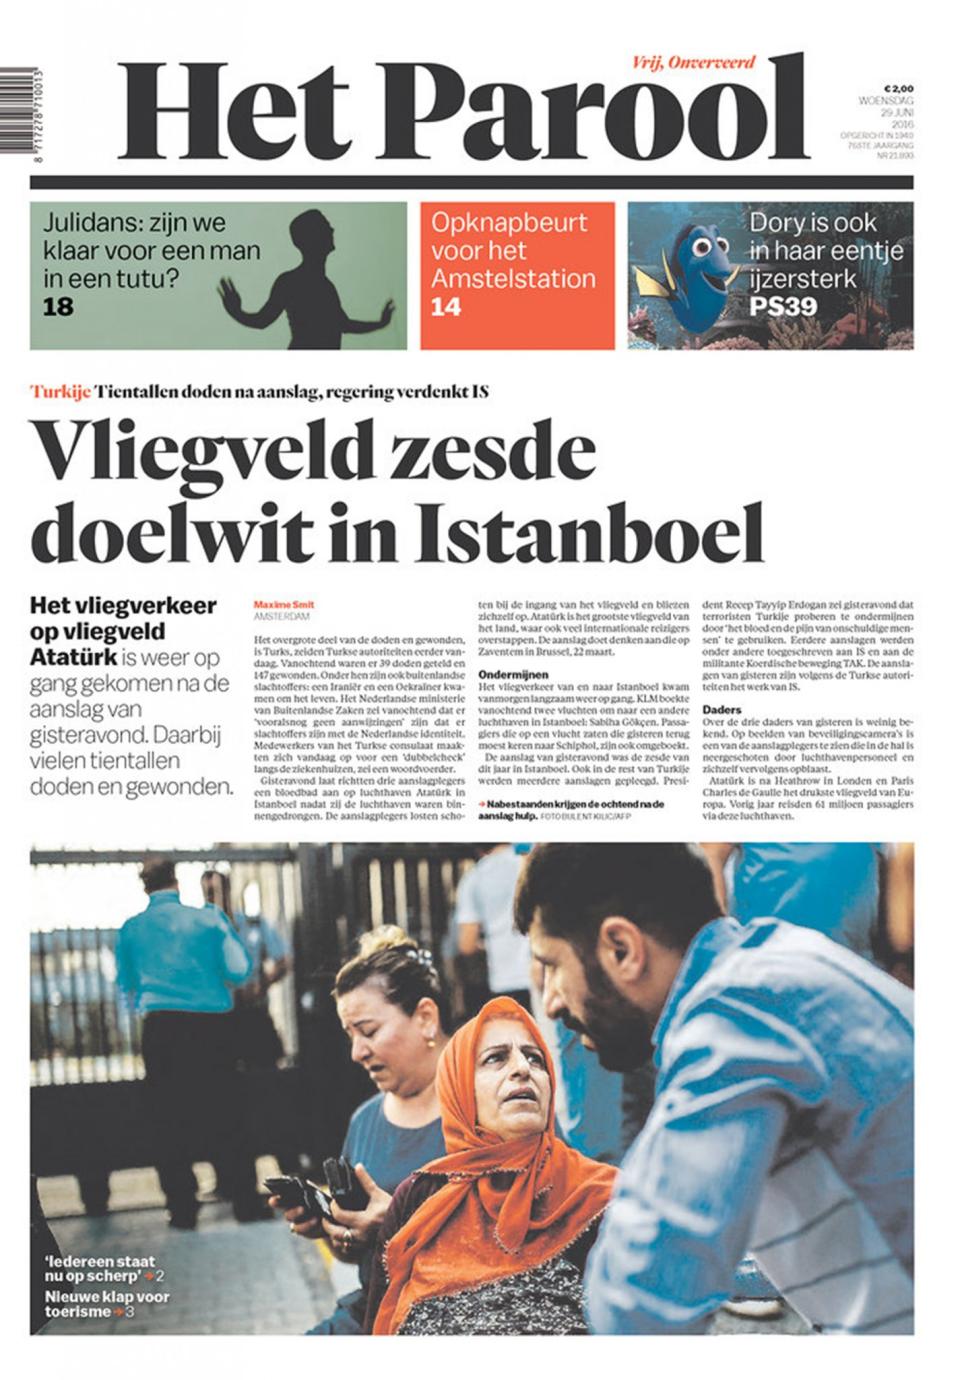 Front-page coverage of Istanbul's Ataturk Airport attack